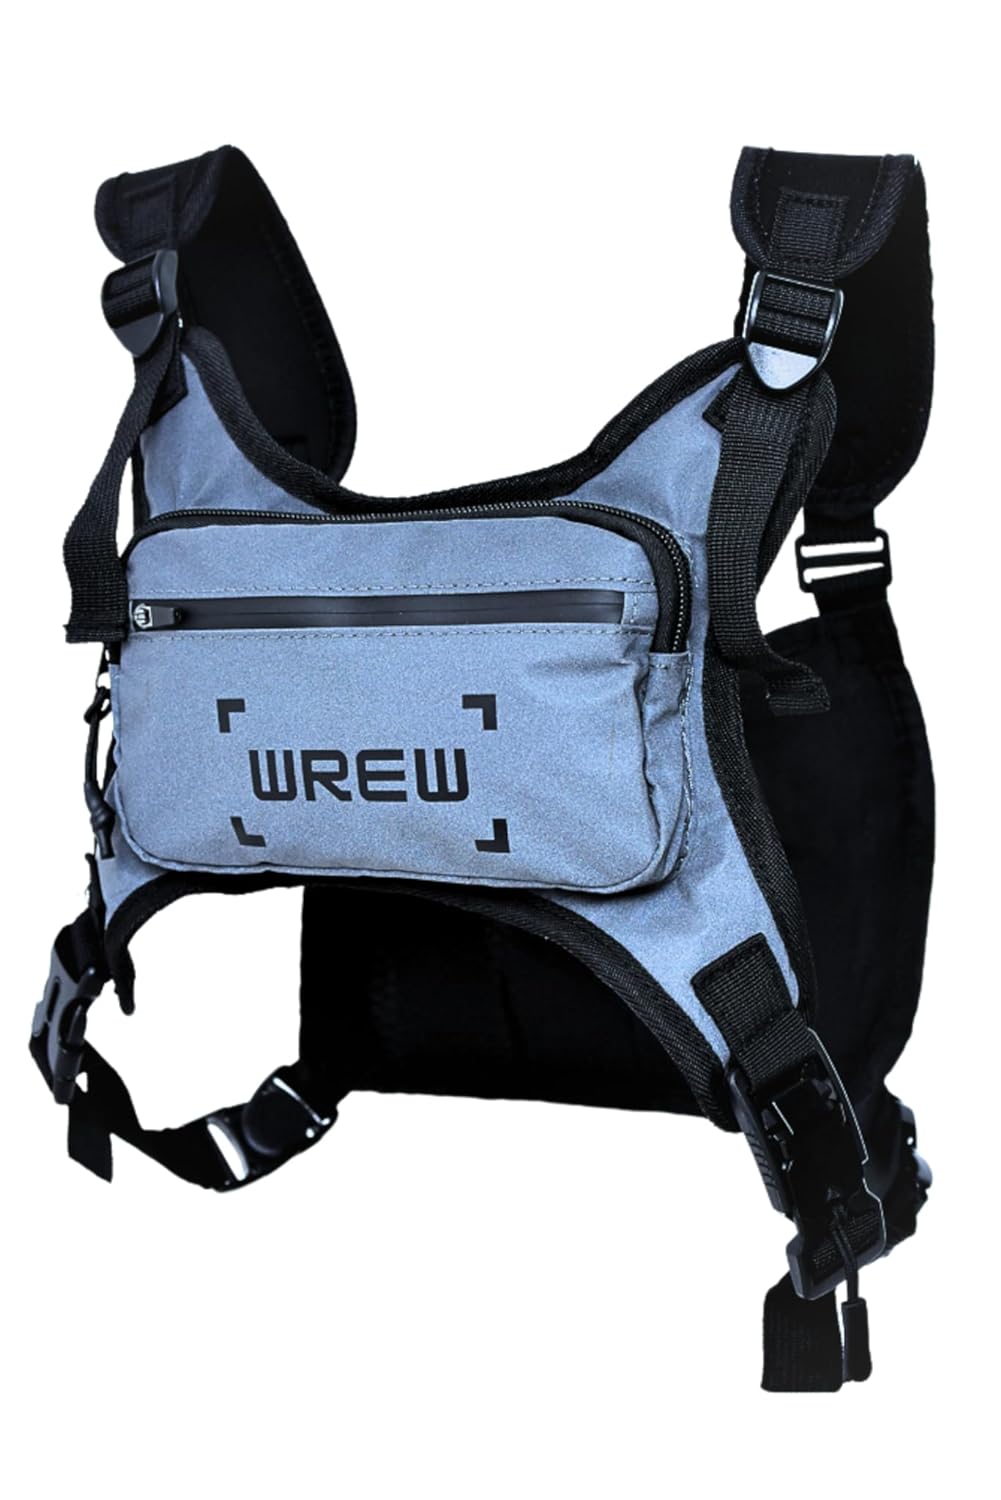 WREW Water Resistant Chest Bag for Men-Chest Pack for Workouts, Hiking with Phone Holder Storage-Adjustable Straps with Magnetic Pull Buckle for Easy Fit, Lightweight Running Vest and Backpack (Grey)